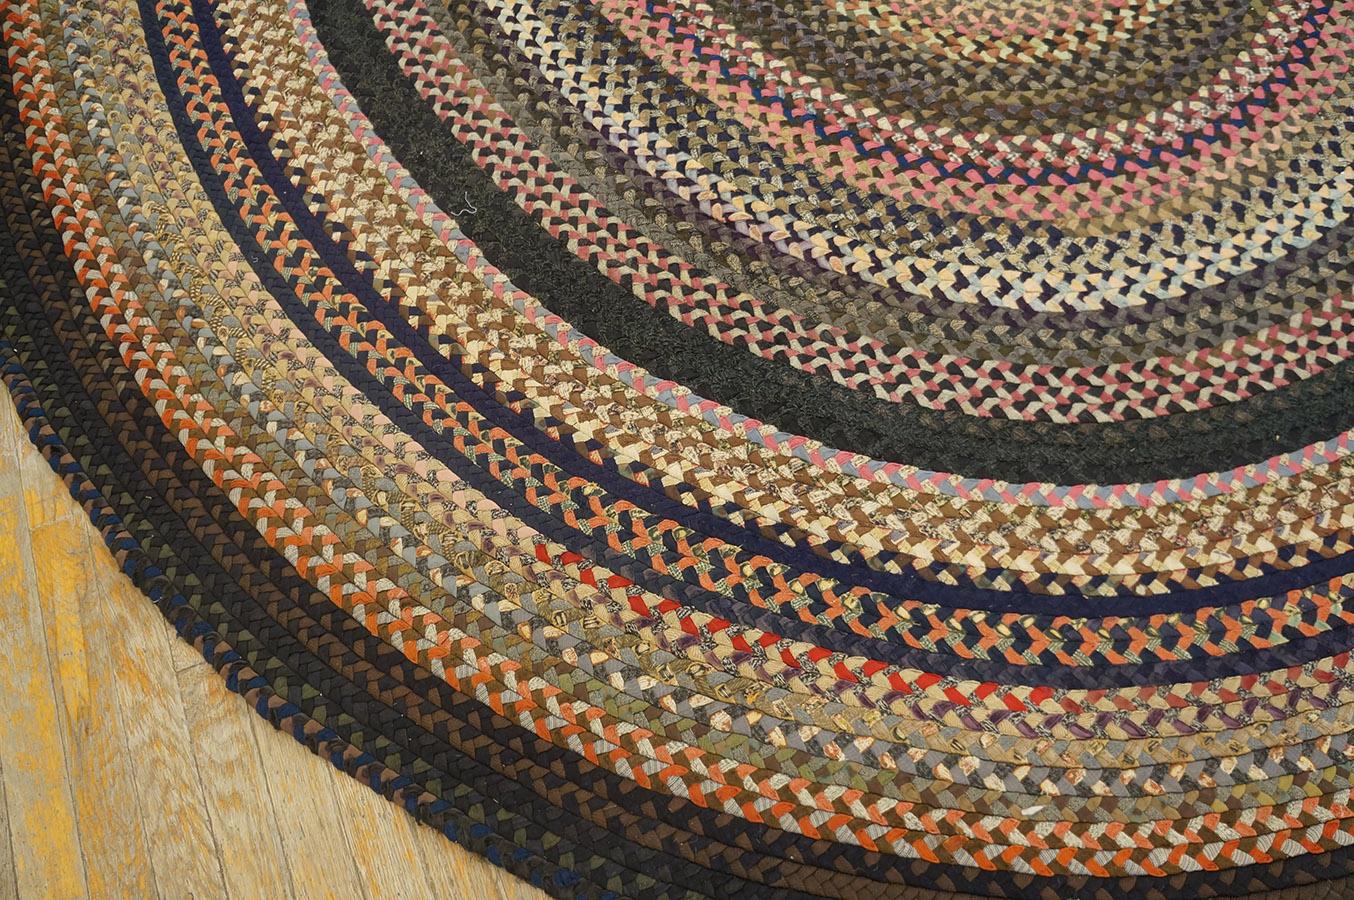 Hand-Woven 1930s American Braided Rug ( 8'10 x 9'9